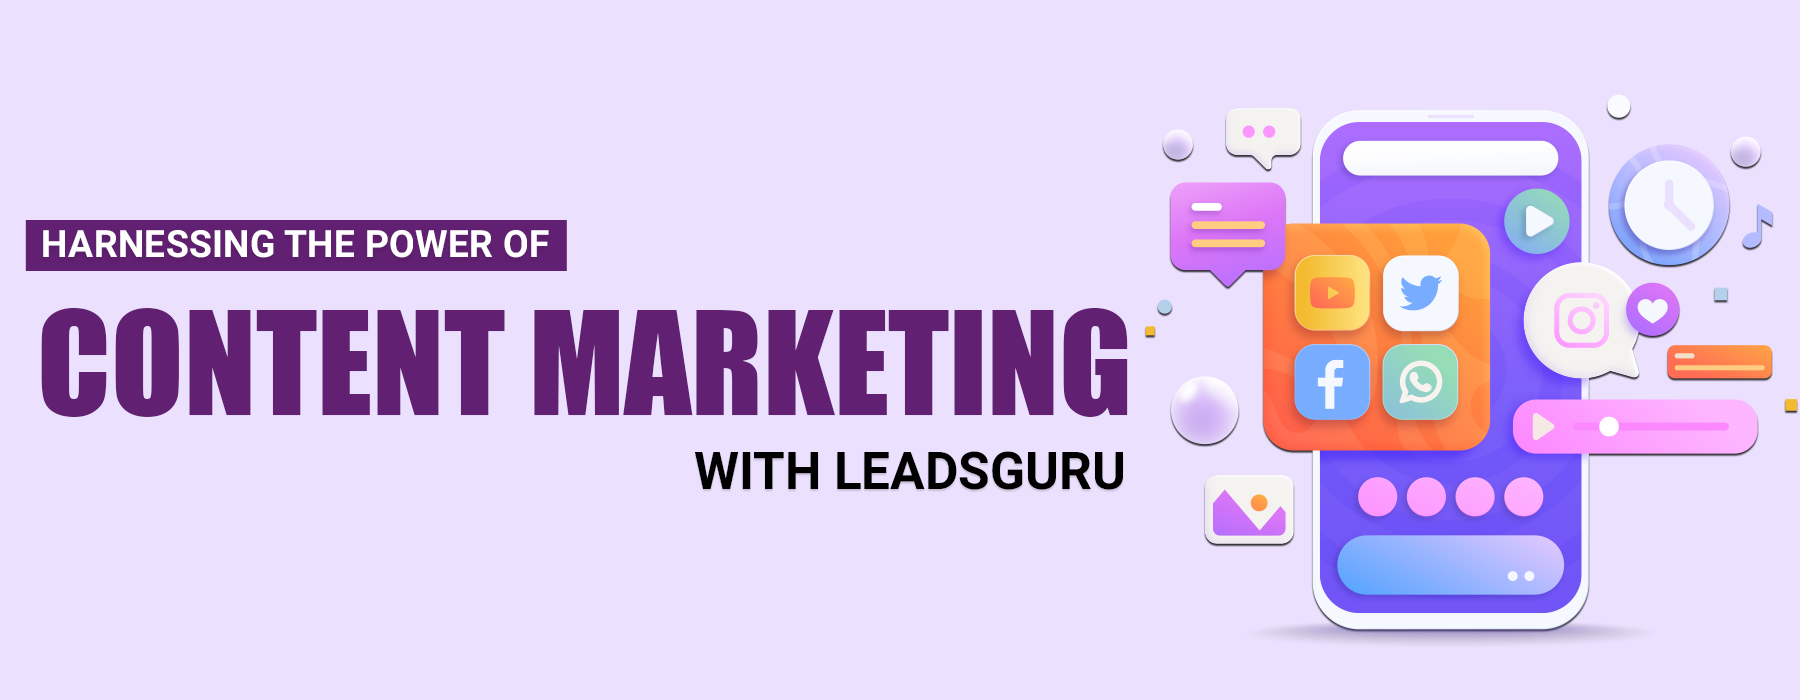 Harnessing the Power of Content Marketing with LeadsGuru